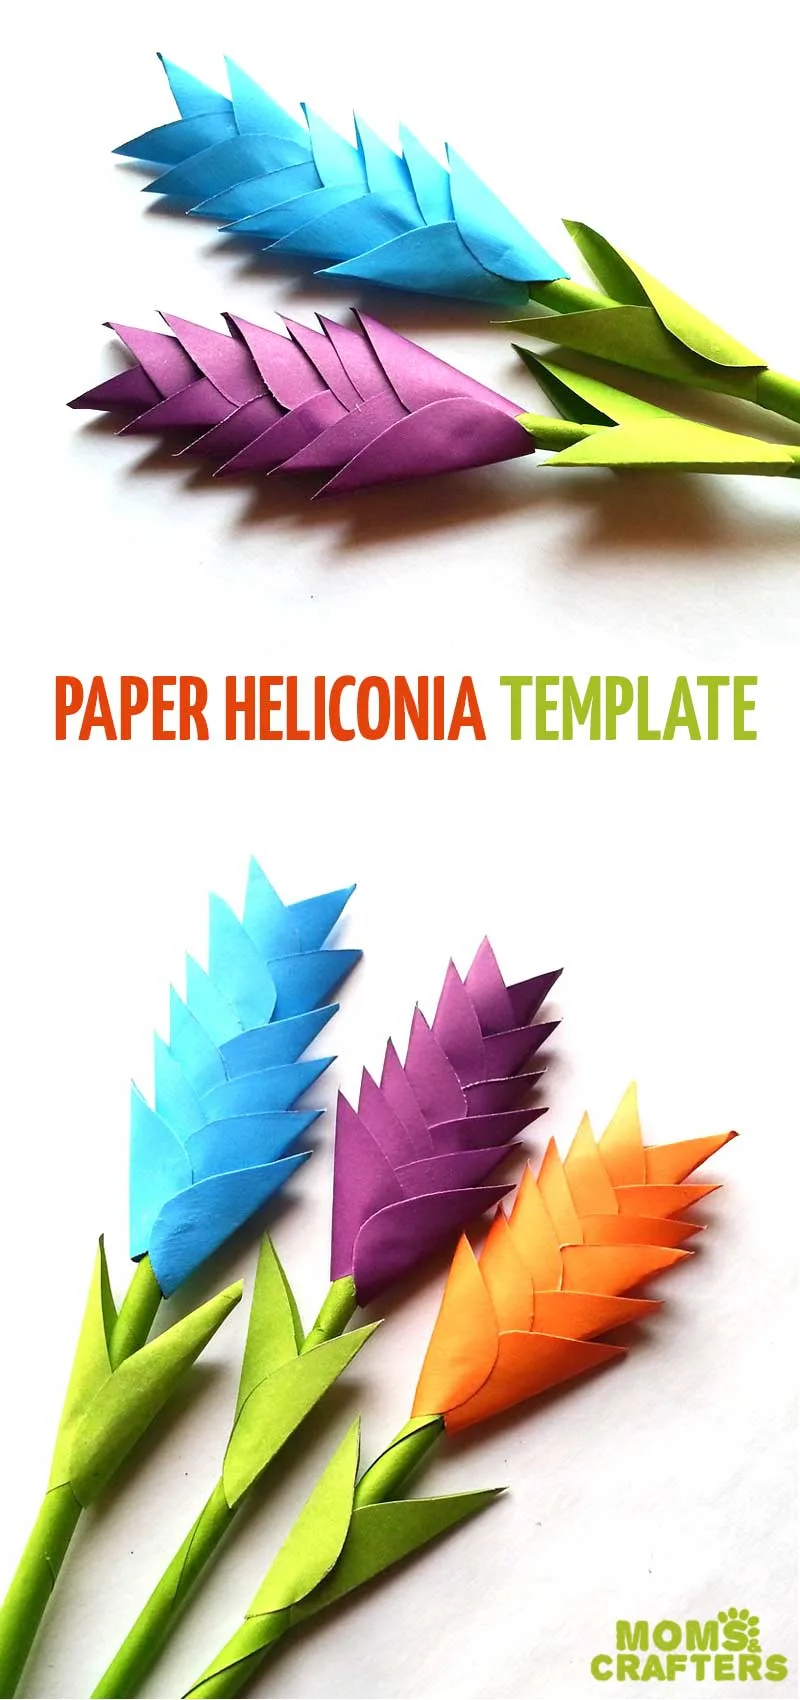 Learn step by step tricks for making diy paper heliconia using colored paper. This spring craft for teens and tweens is easy and beautiful beginner paper flowers. 